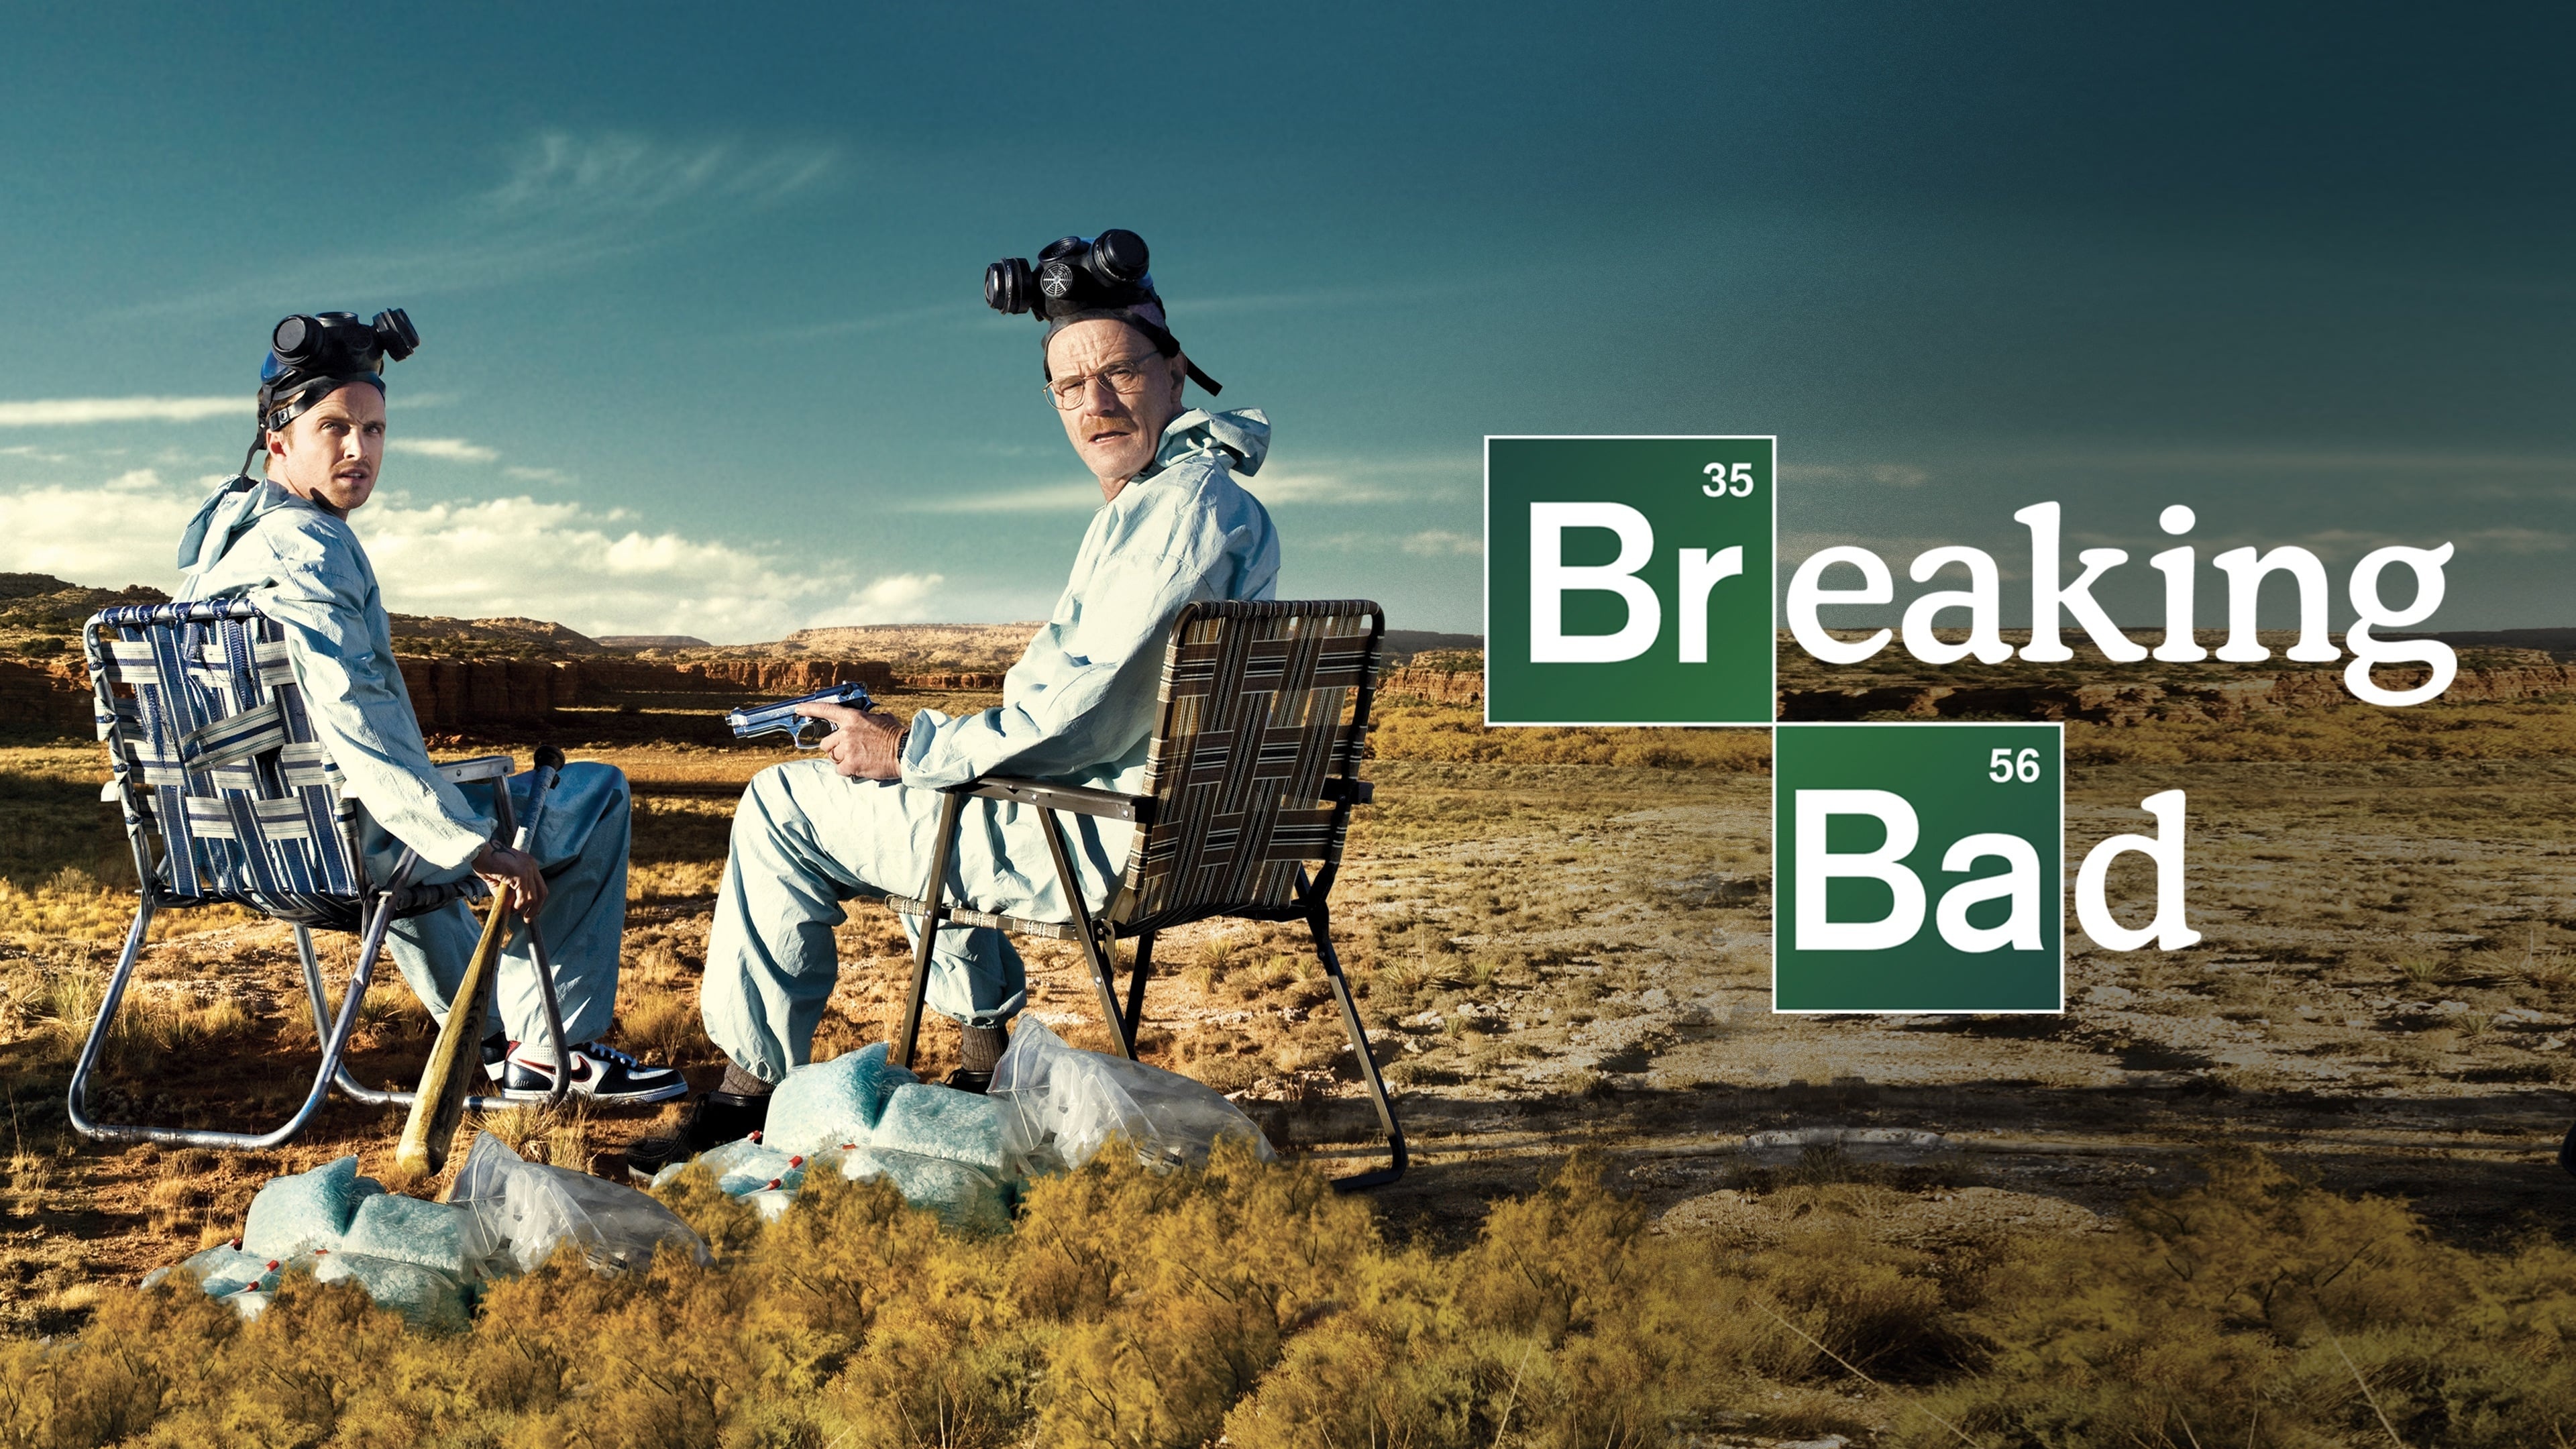 Bryan Cranston: A high-school chemistry teacher who, shortly after his 50th birthday, is diagnosed with Stage III lung cancer and turns to making meth to secure his family's finances. 3840x2160 4K Wallpaper.